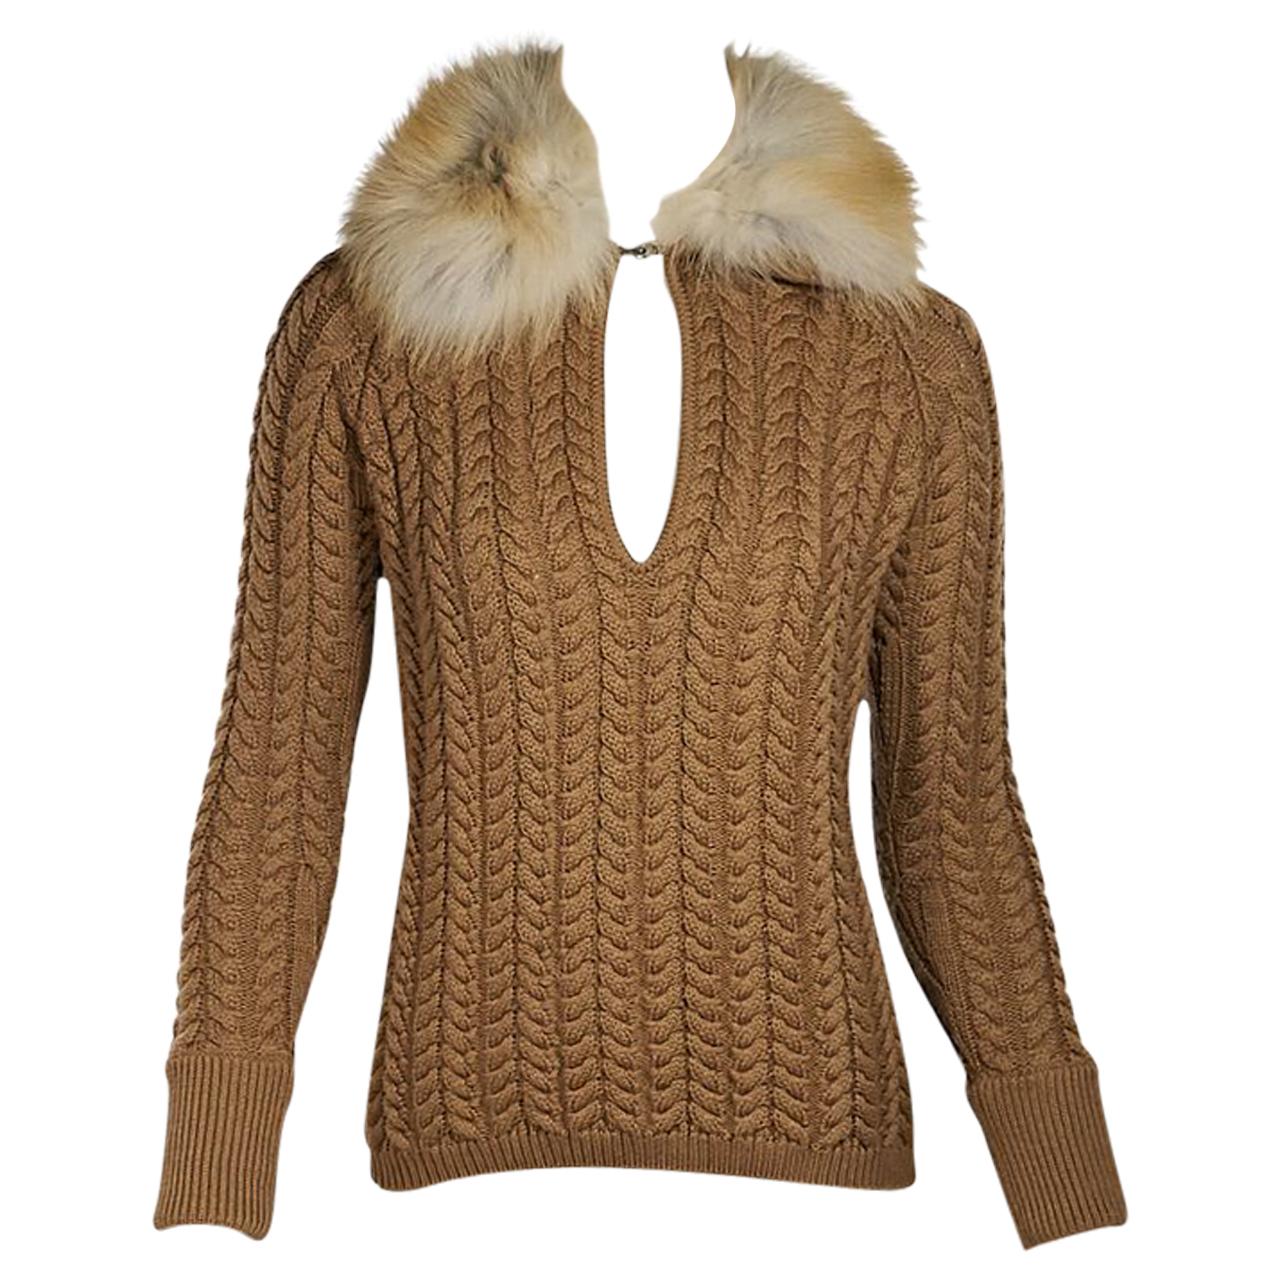 Brown Andrew Gn Fur-Collar Knit Sweater